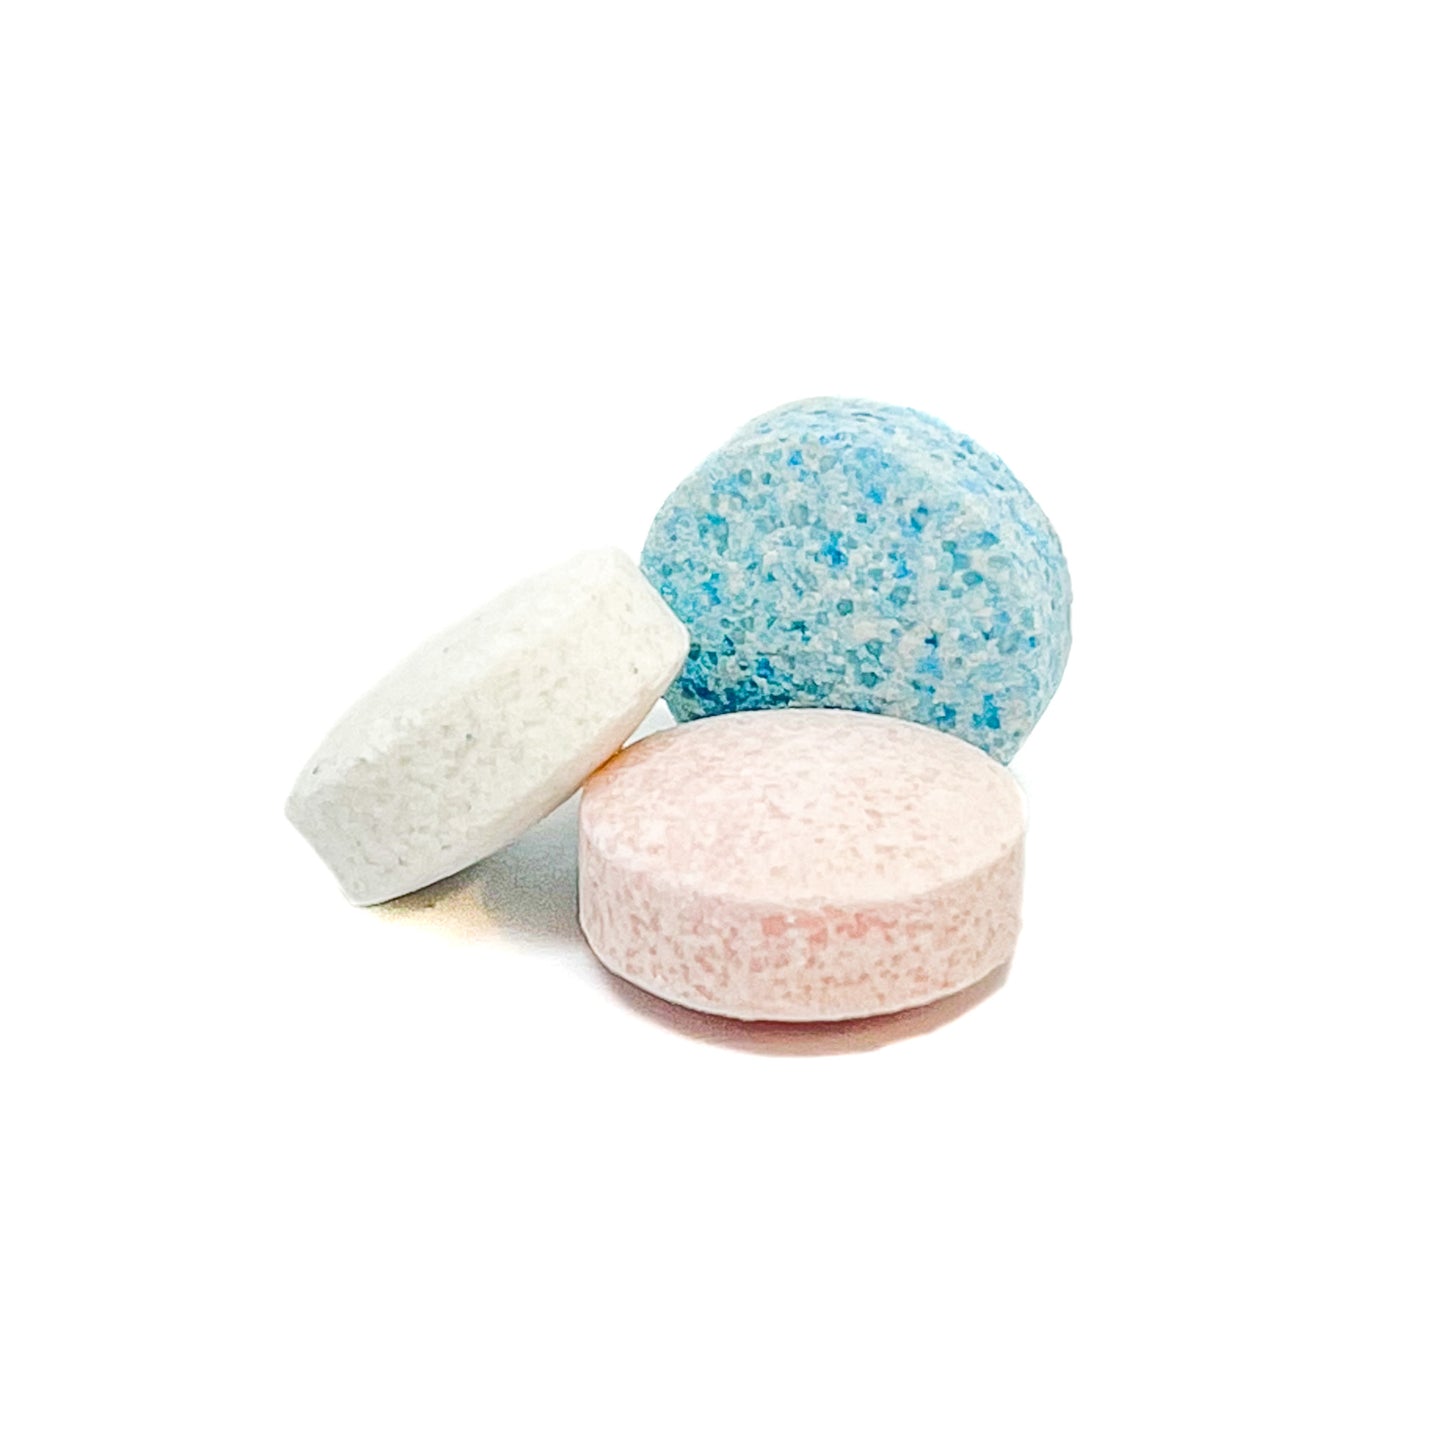 Mixed Refill Tablets